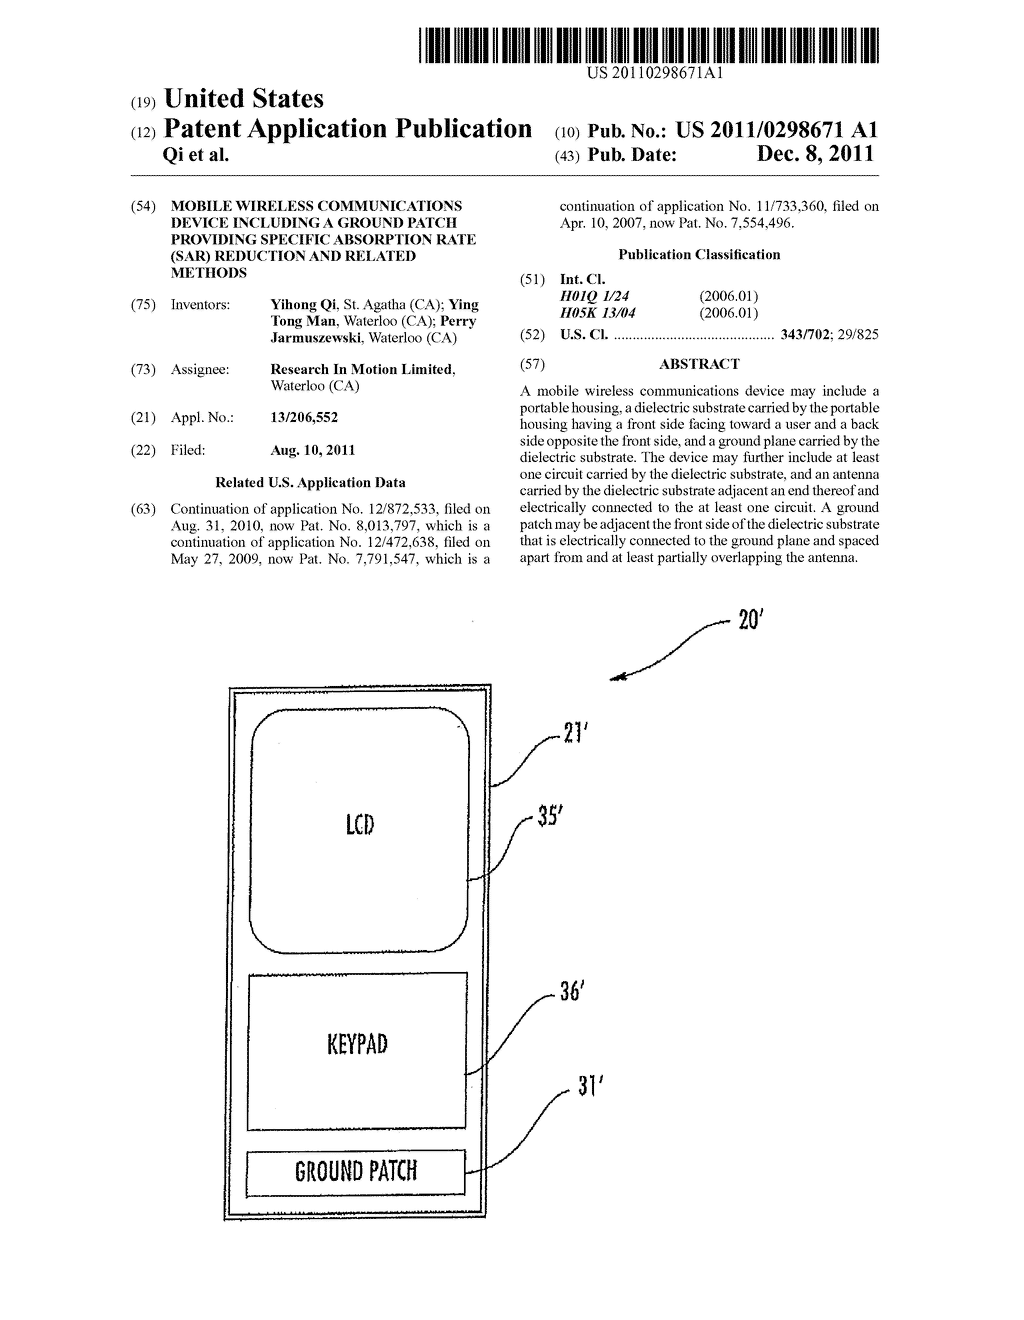 MOBILE WIRELESS COMMUNICATIONS DEVICE INCLUDING A GROUND PATCH PROVIDING     SPECIFIC ABSORPTION RATE (SAR) REDUCTION AND RELATED METHODS - diagram, schematic, and image 01